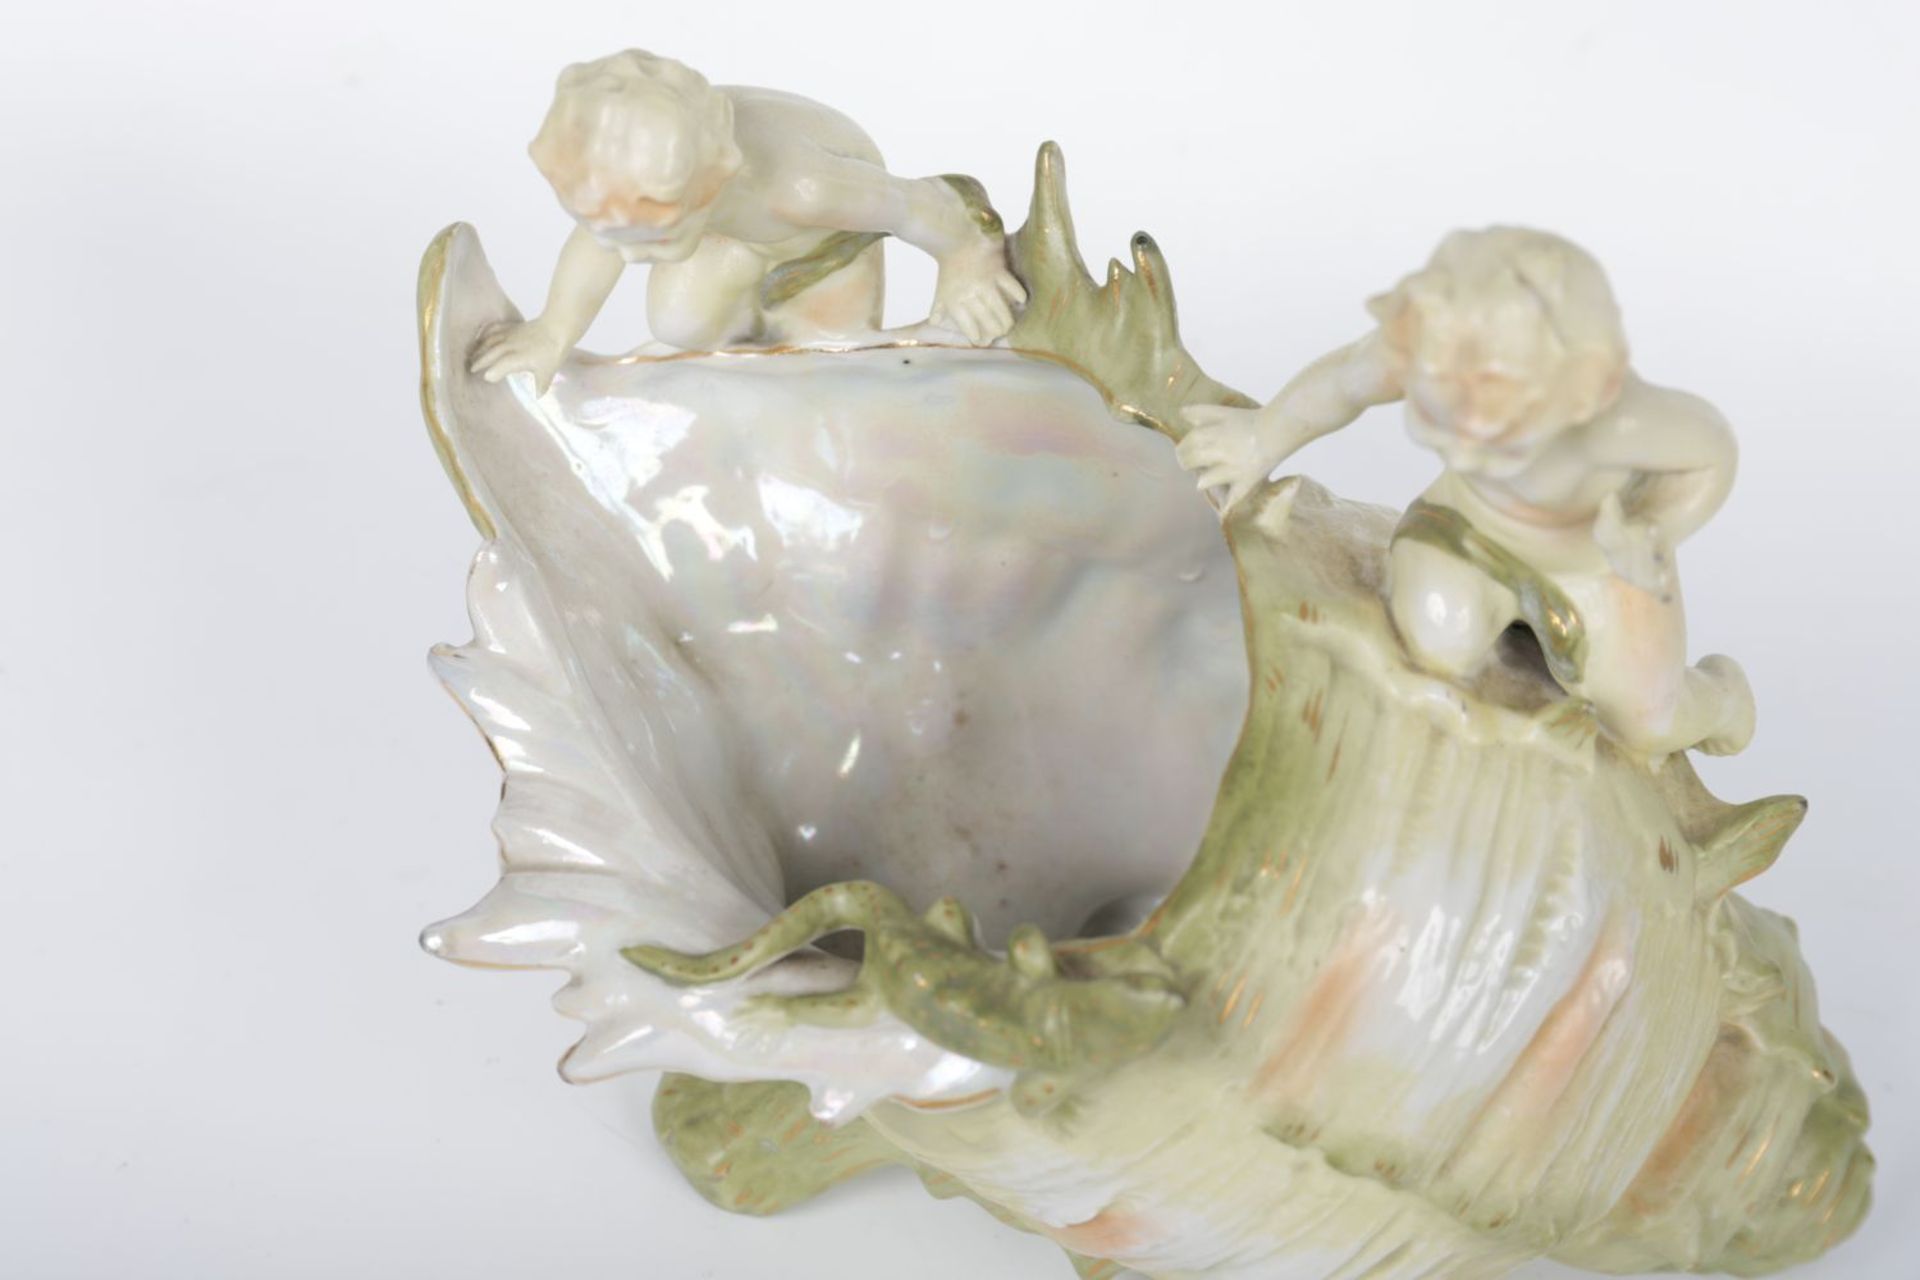 19TH-CENTURY CONCH SHELL - Image 3 of 4